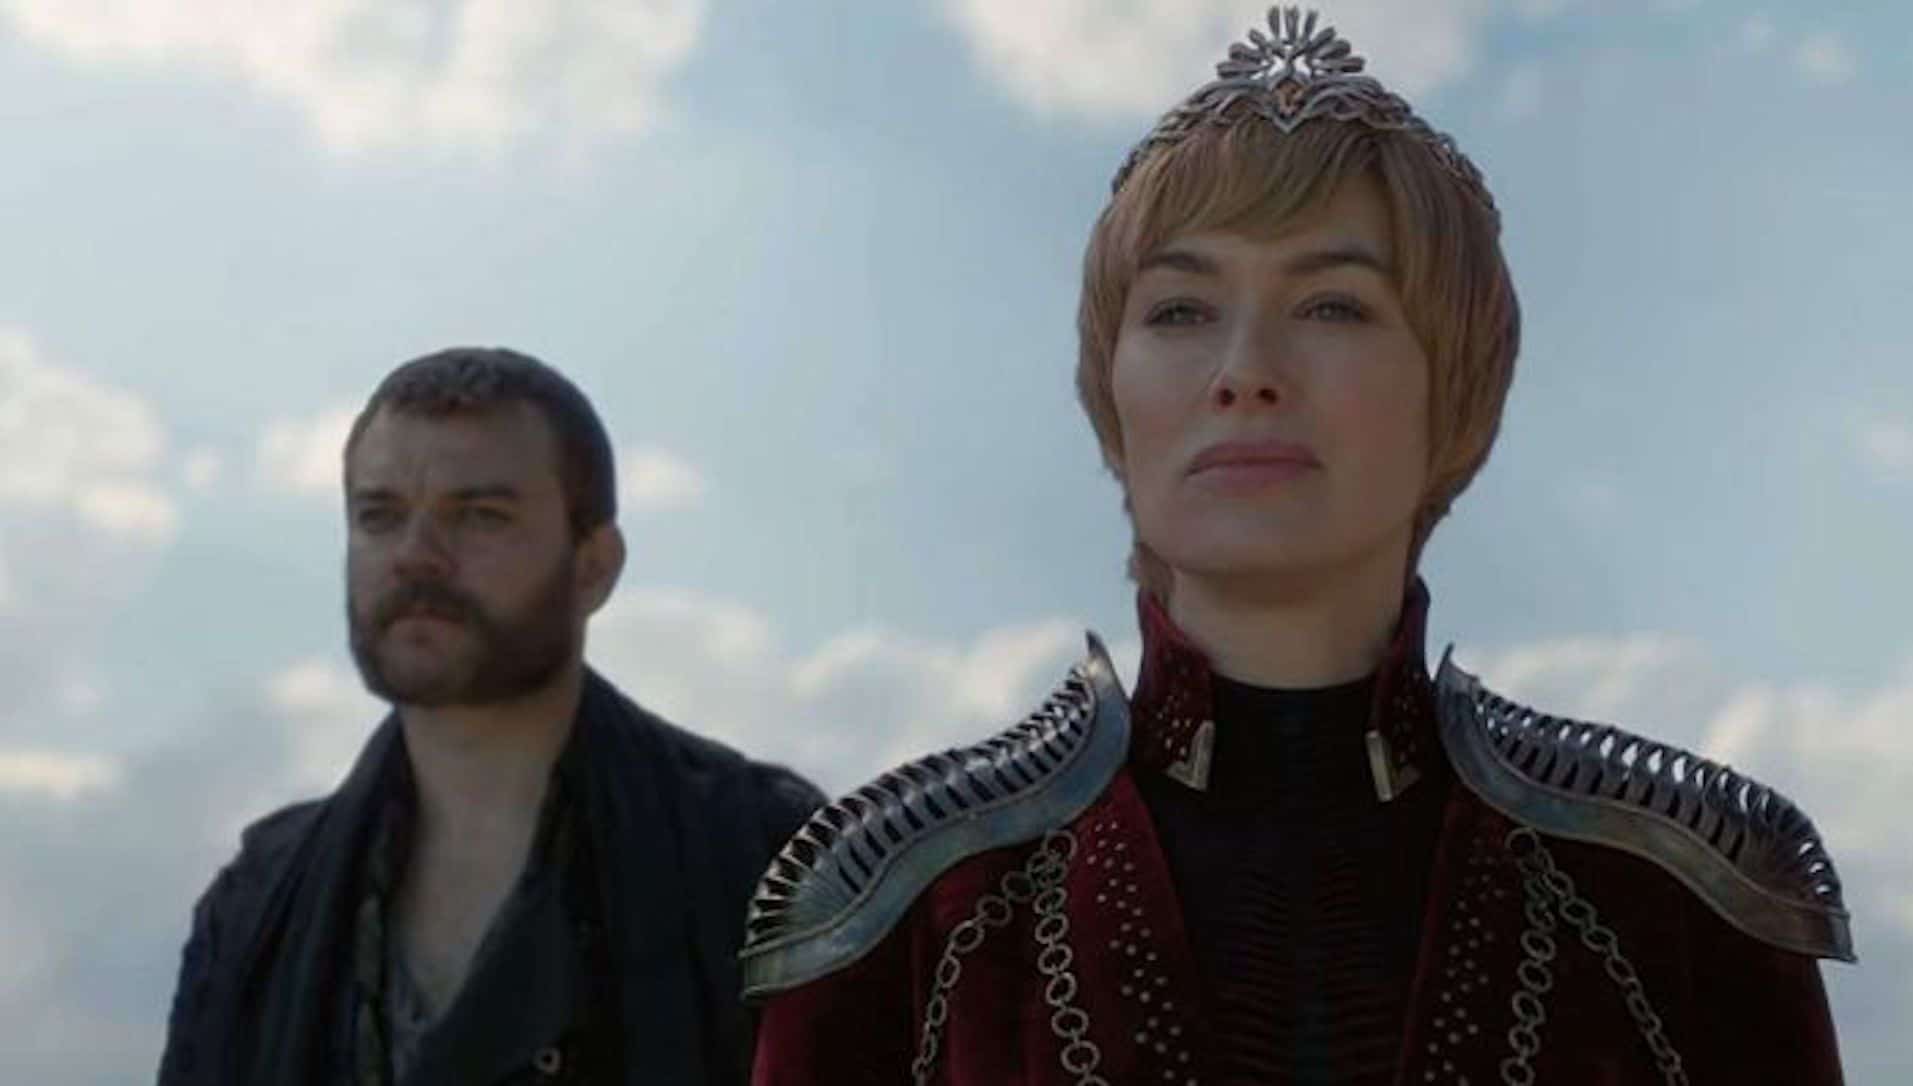 ESSENCE's Game of Thrones Group Chat: Cersei Is Back On Her Same Ole BS